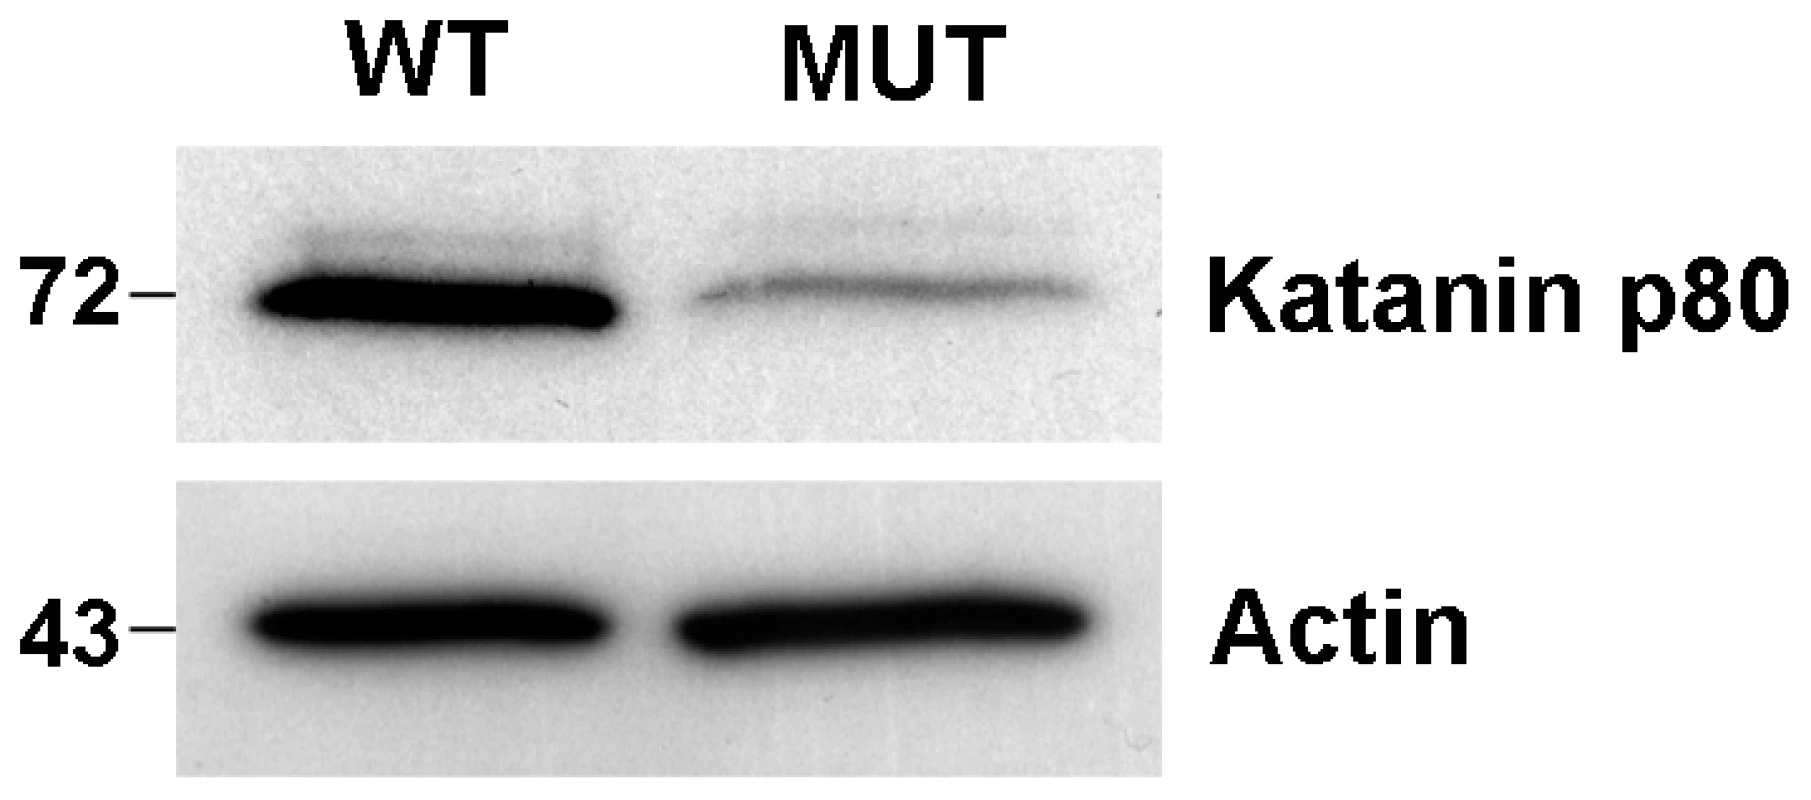 Reduction in katanin p80 protein in haploid germ cells from <i>Katnb1<sup>Taily/Taily</sup></i> mice.